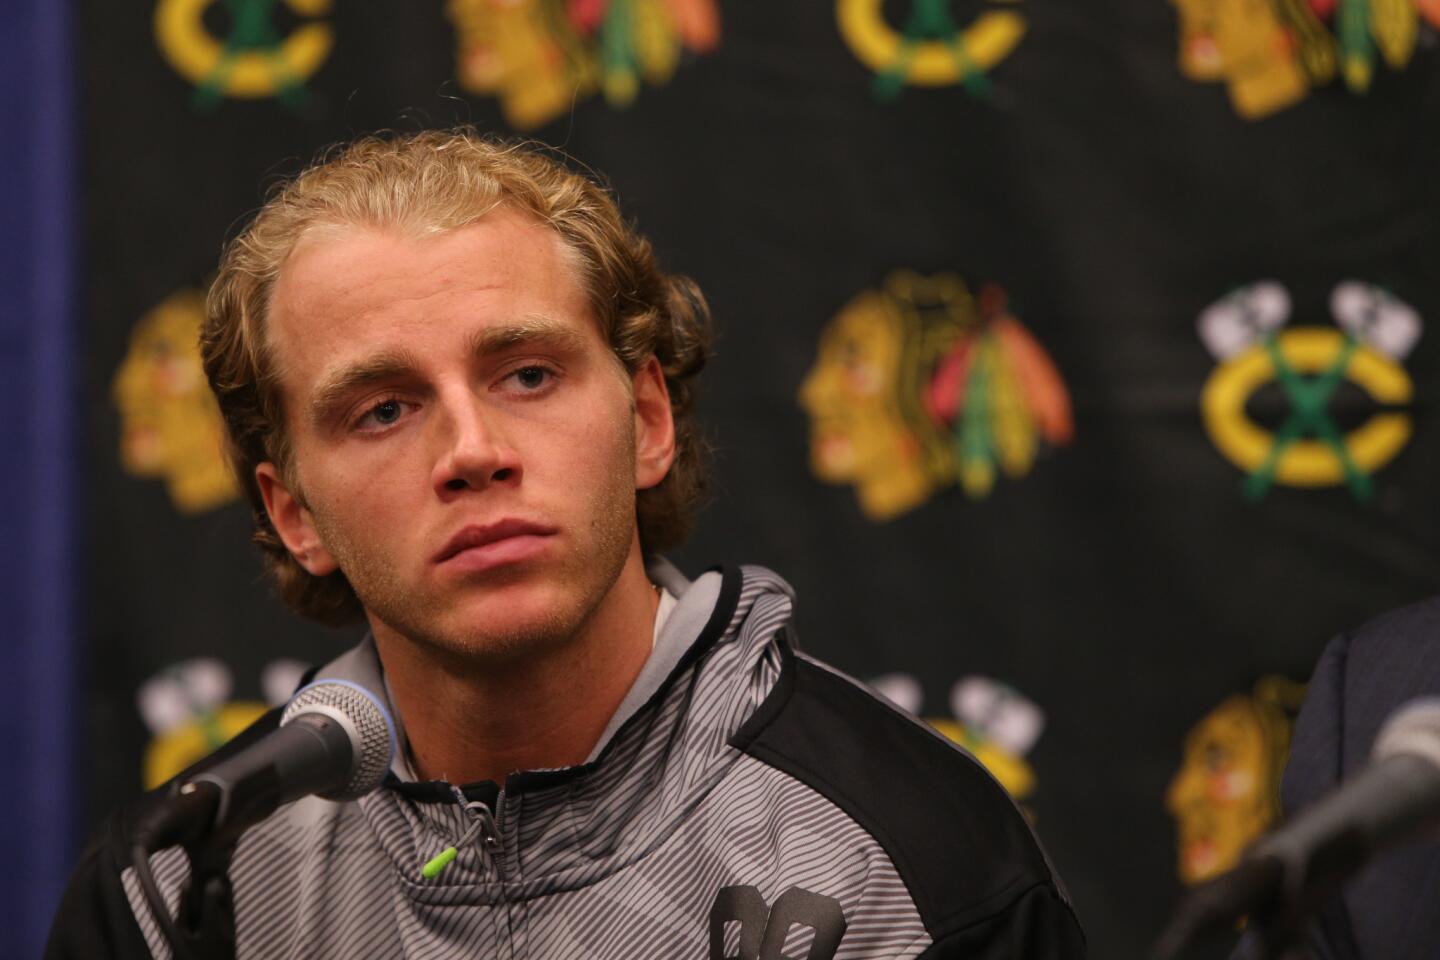 Patrick Kane speaks to the media at a press conference before the start of Blackhawks training camp at the University of Notre Dame's Compton Family Ice Center in South Bend, Ind., Sept. 17, 2015.